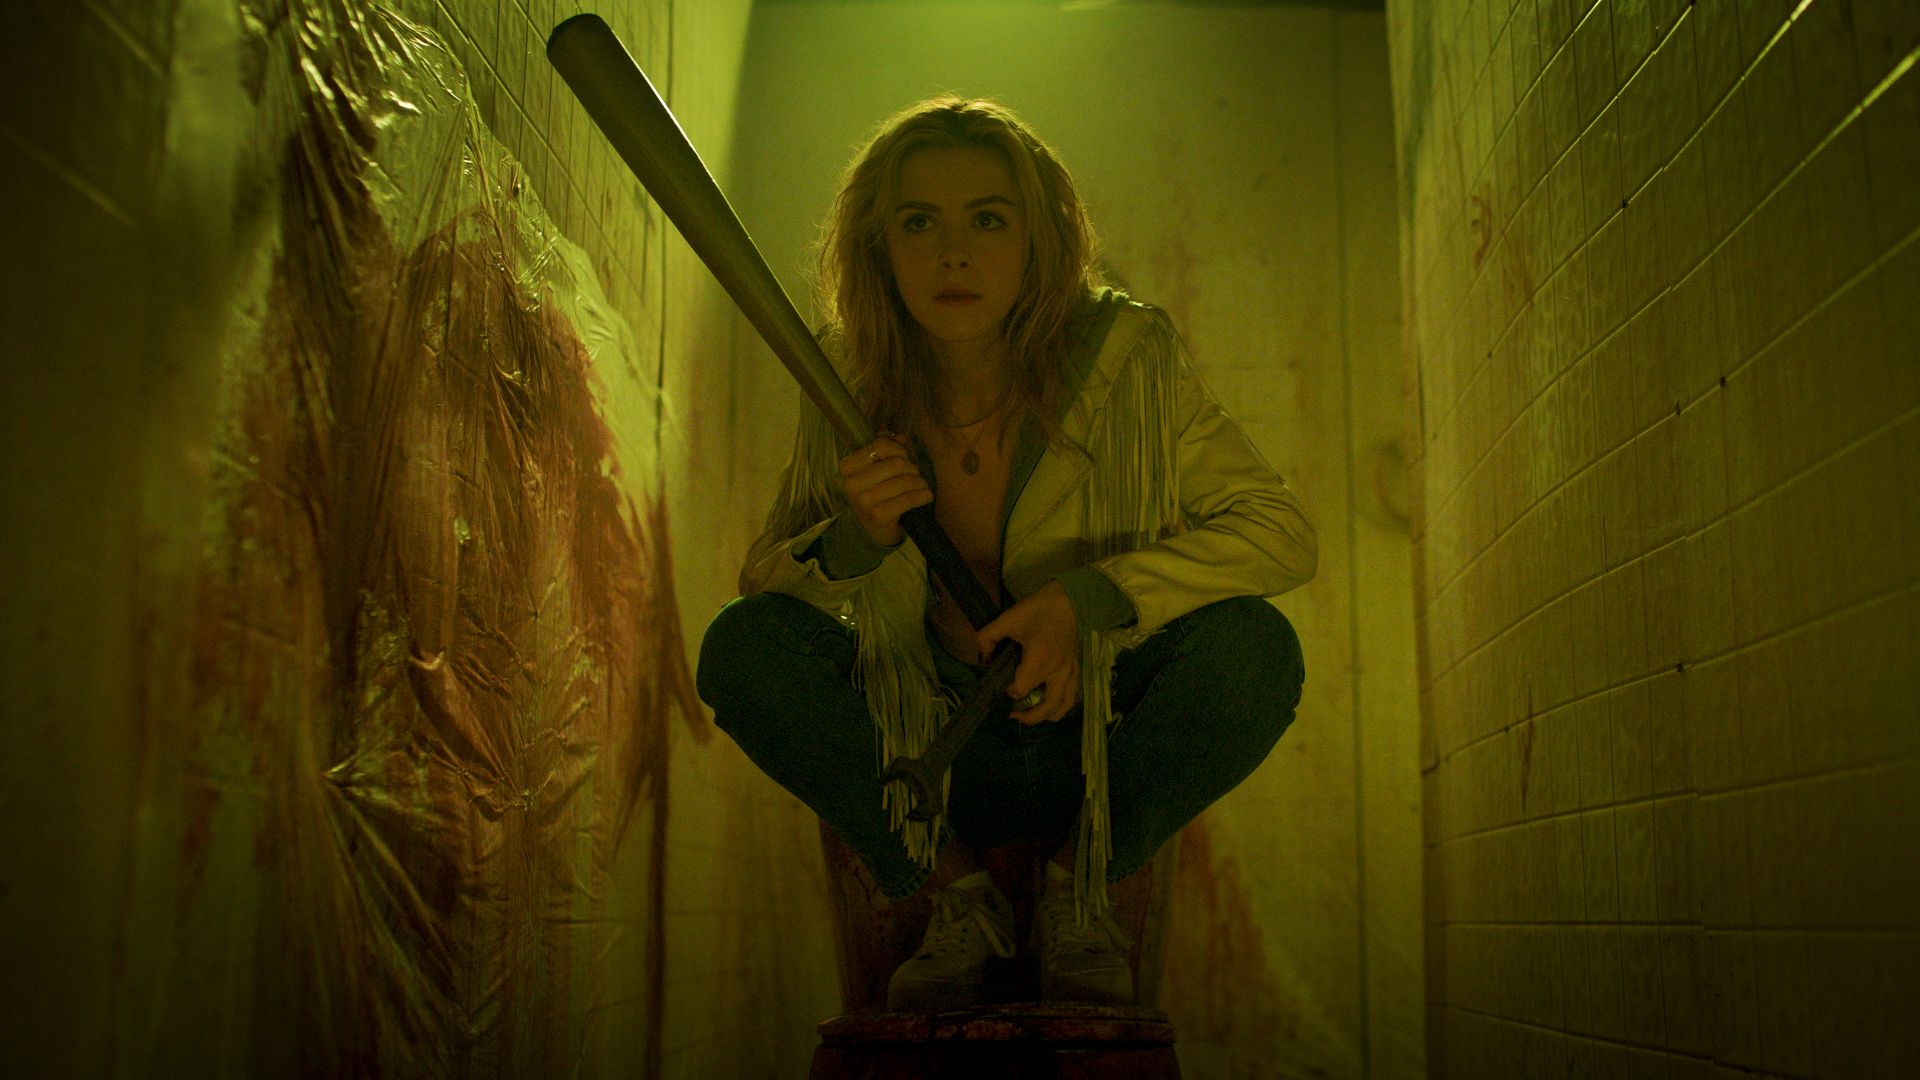 Ready Or Not': Horror Comedy Bloodbath Is An Entertaining If